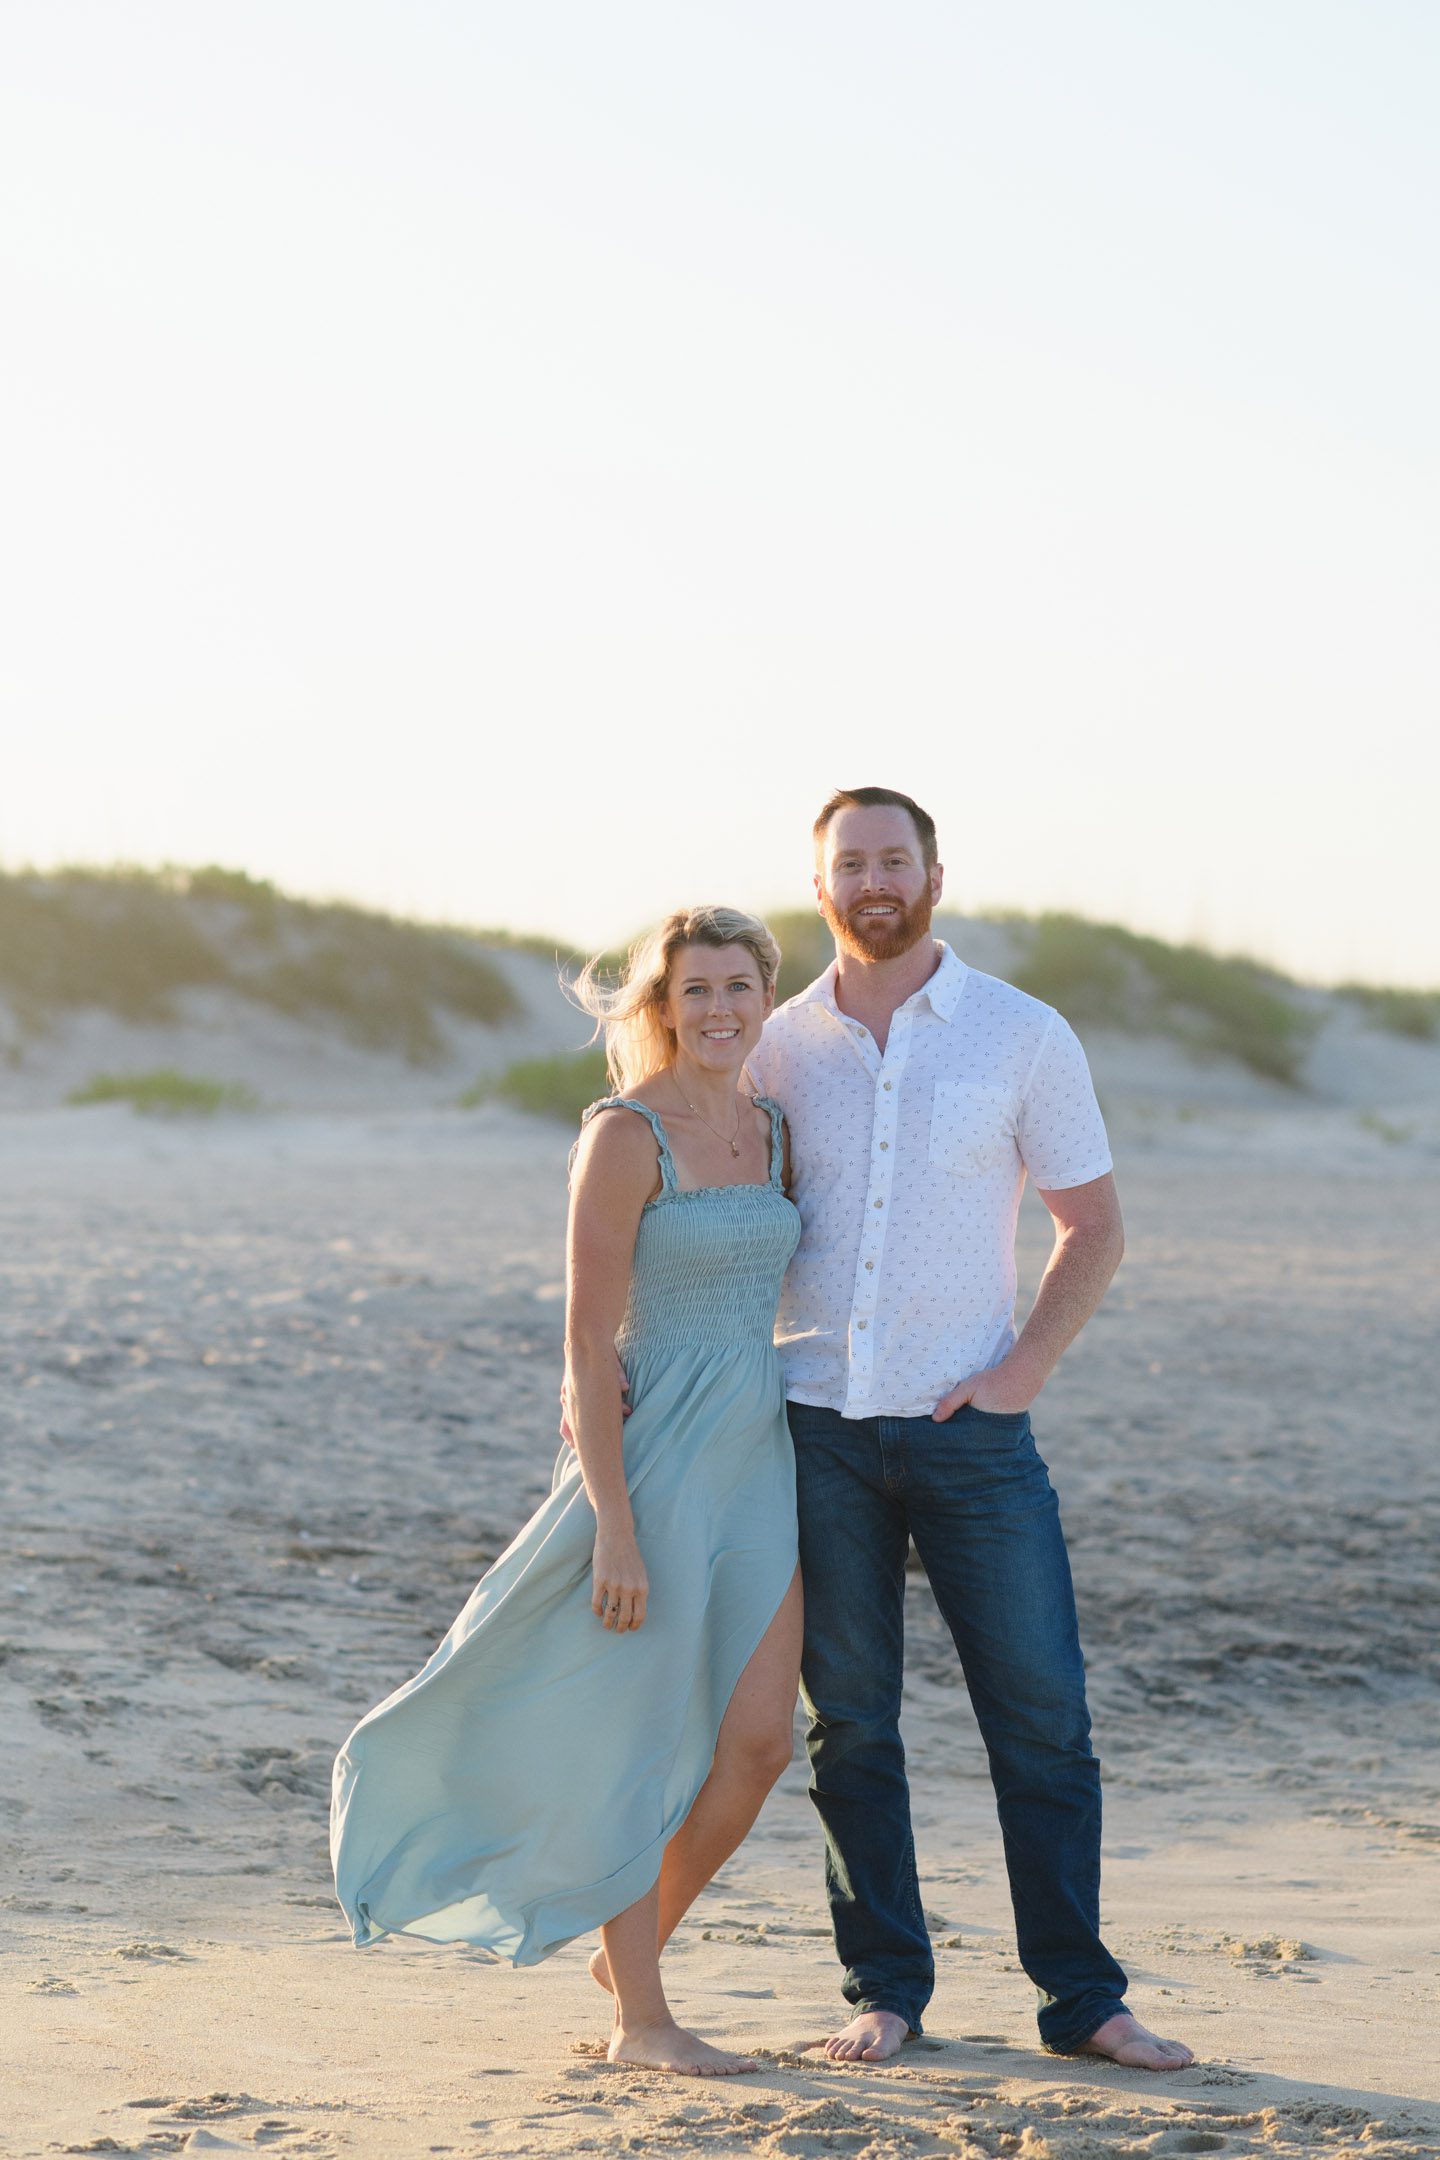 Portraits with a couple on the beach in Avon